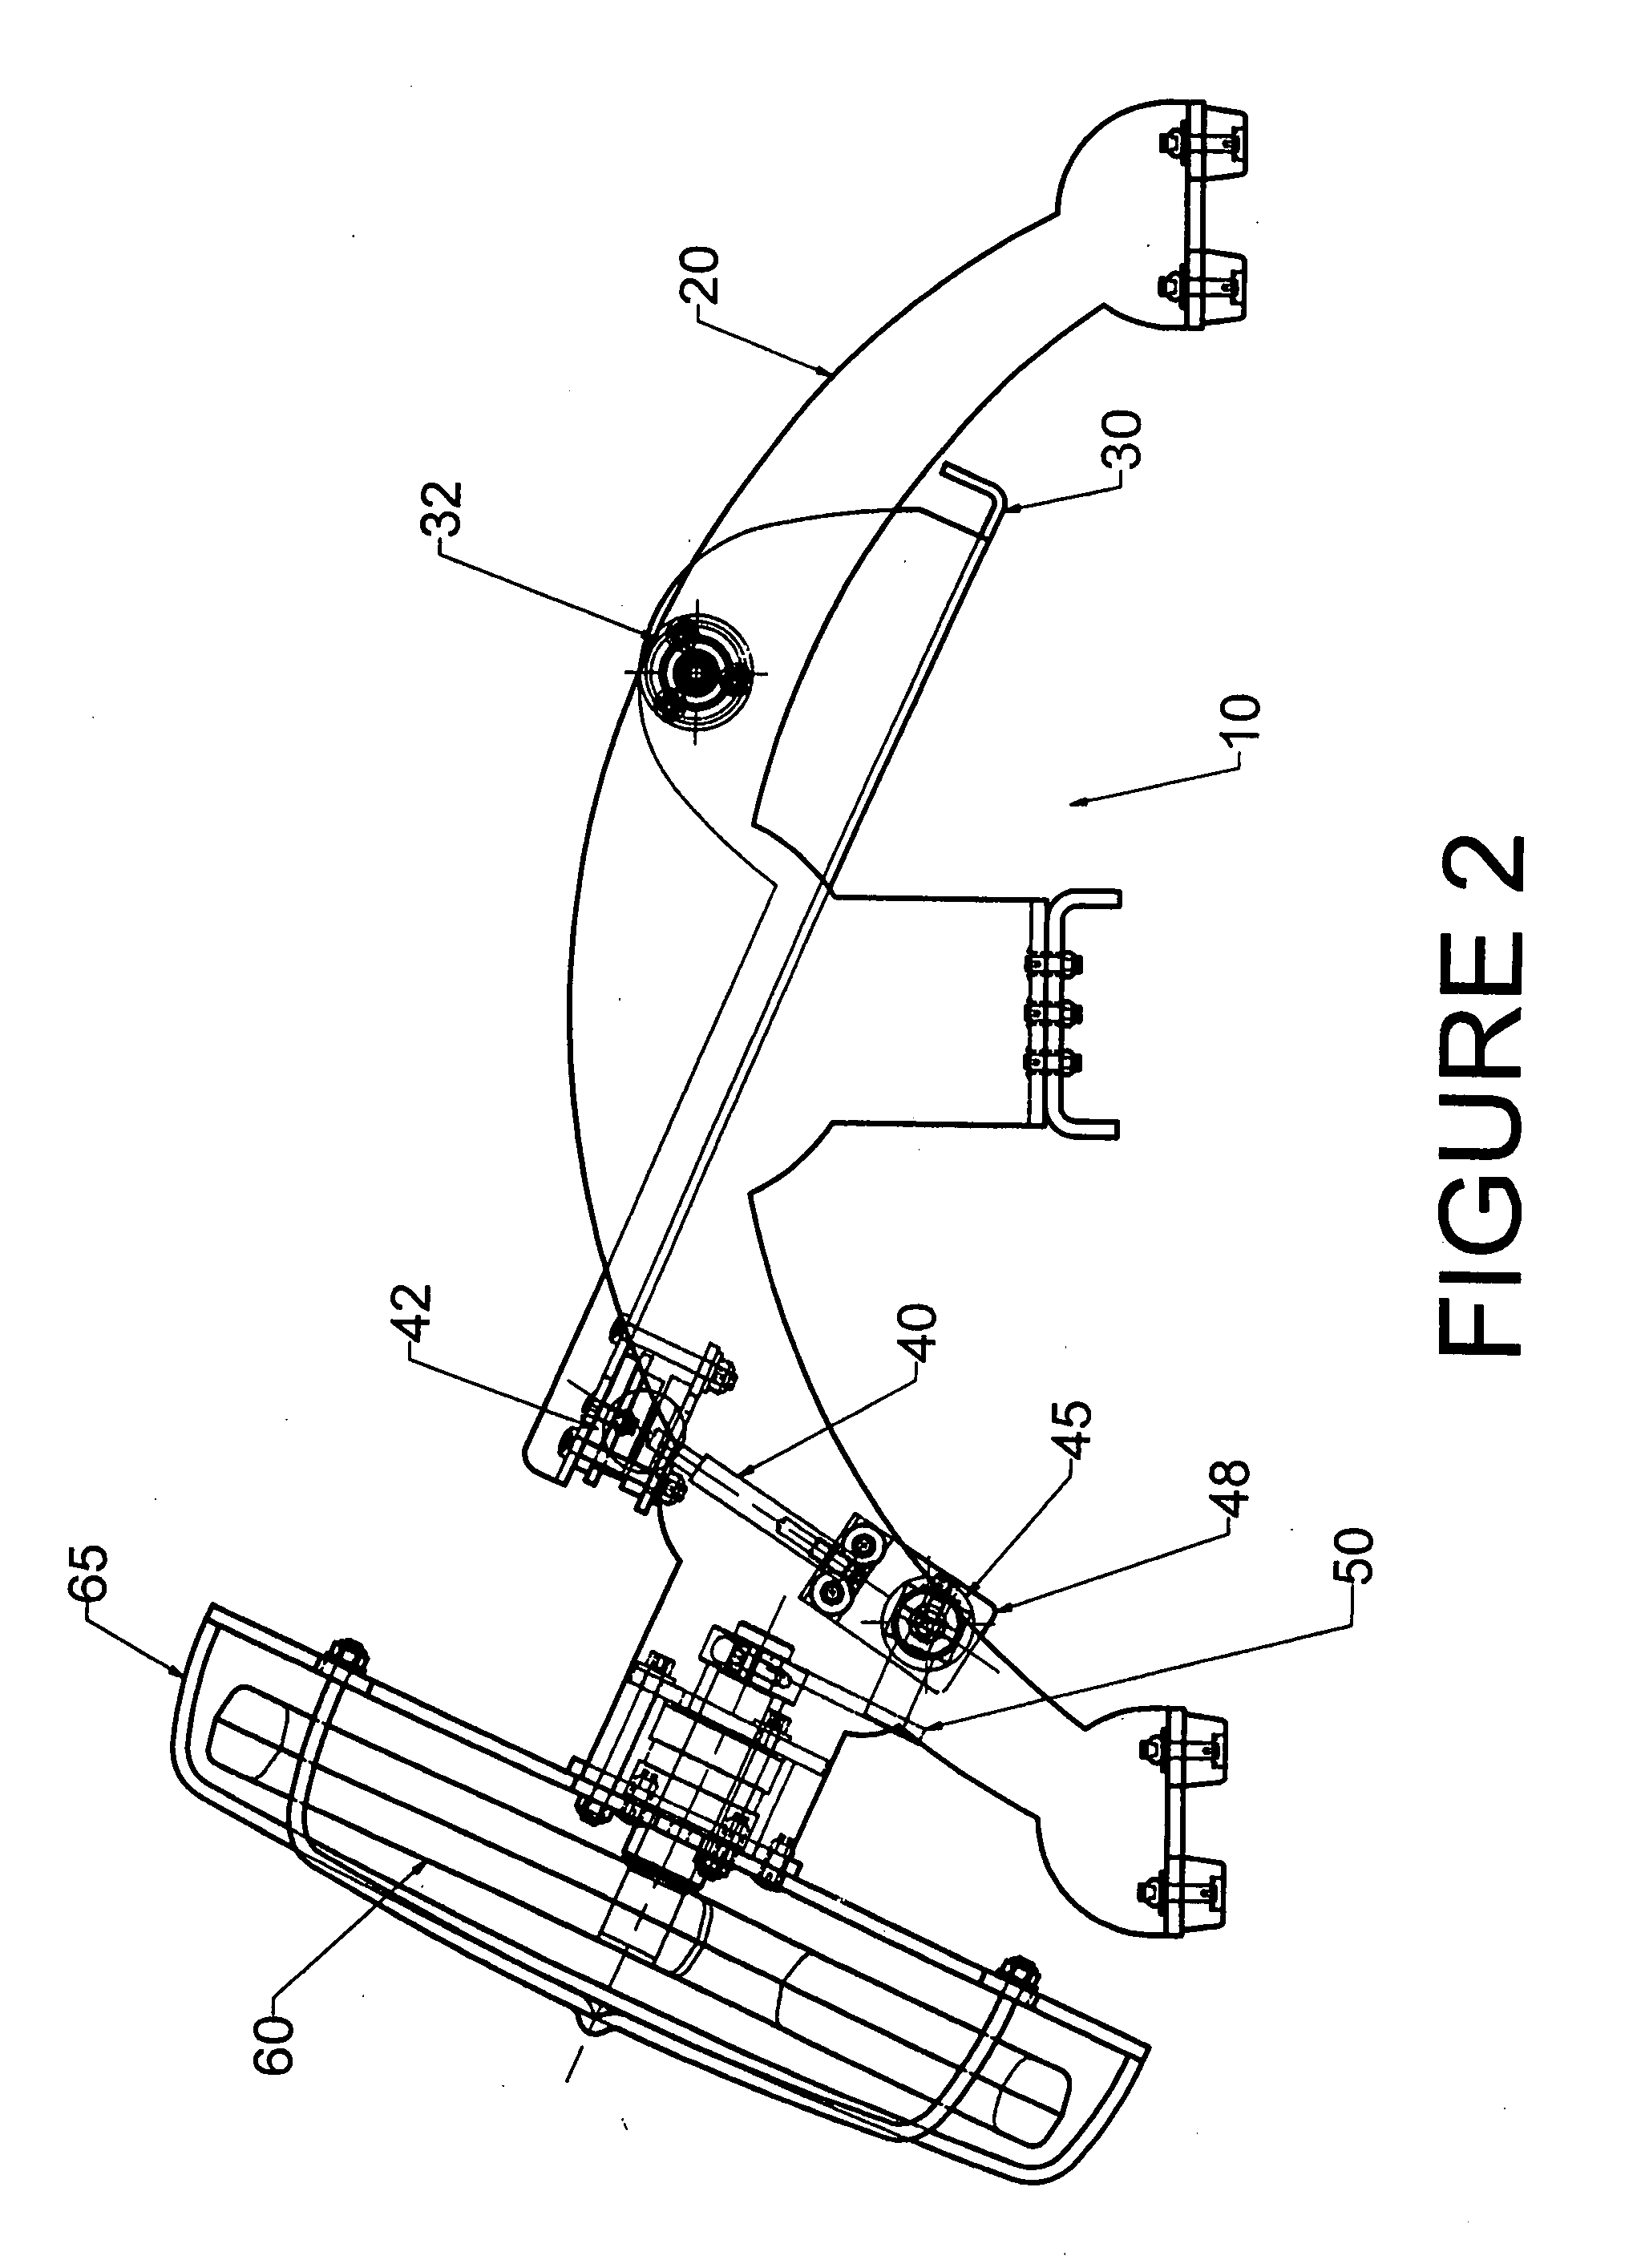 Foot and leg exercising device providing passive motion benefits